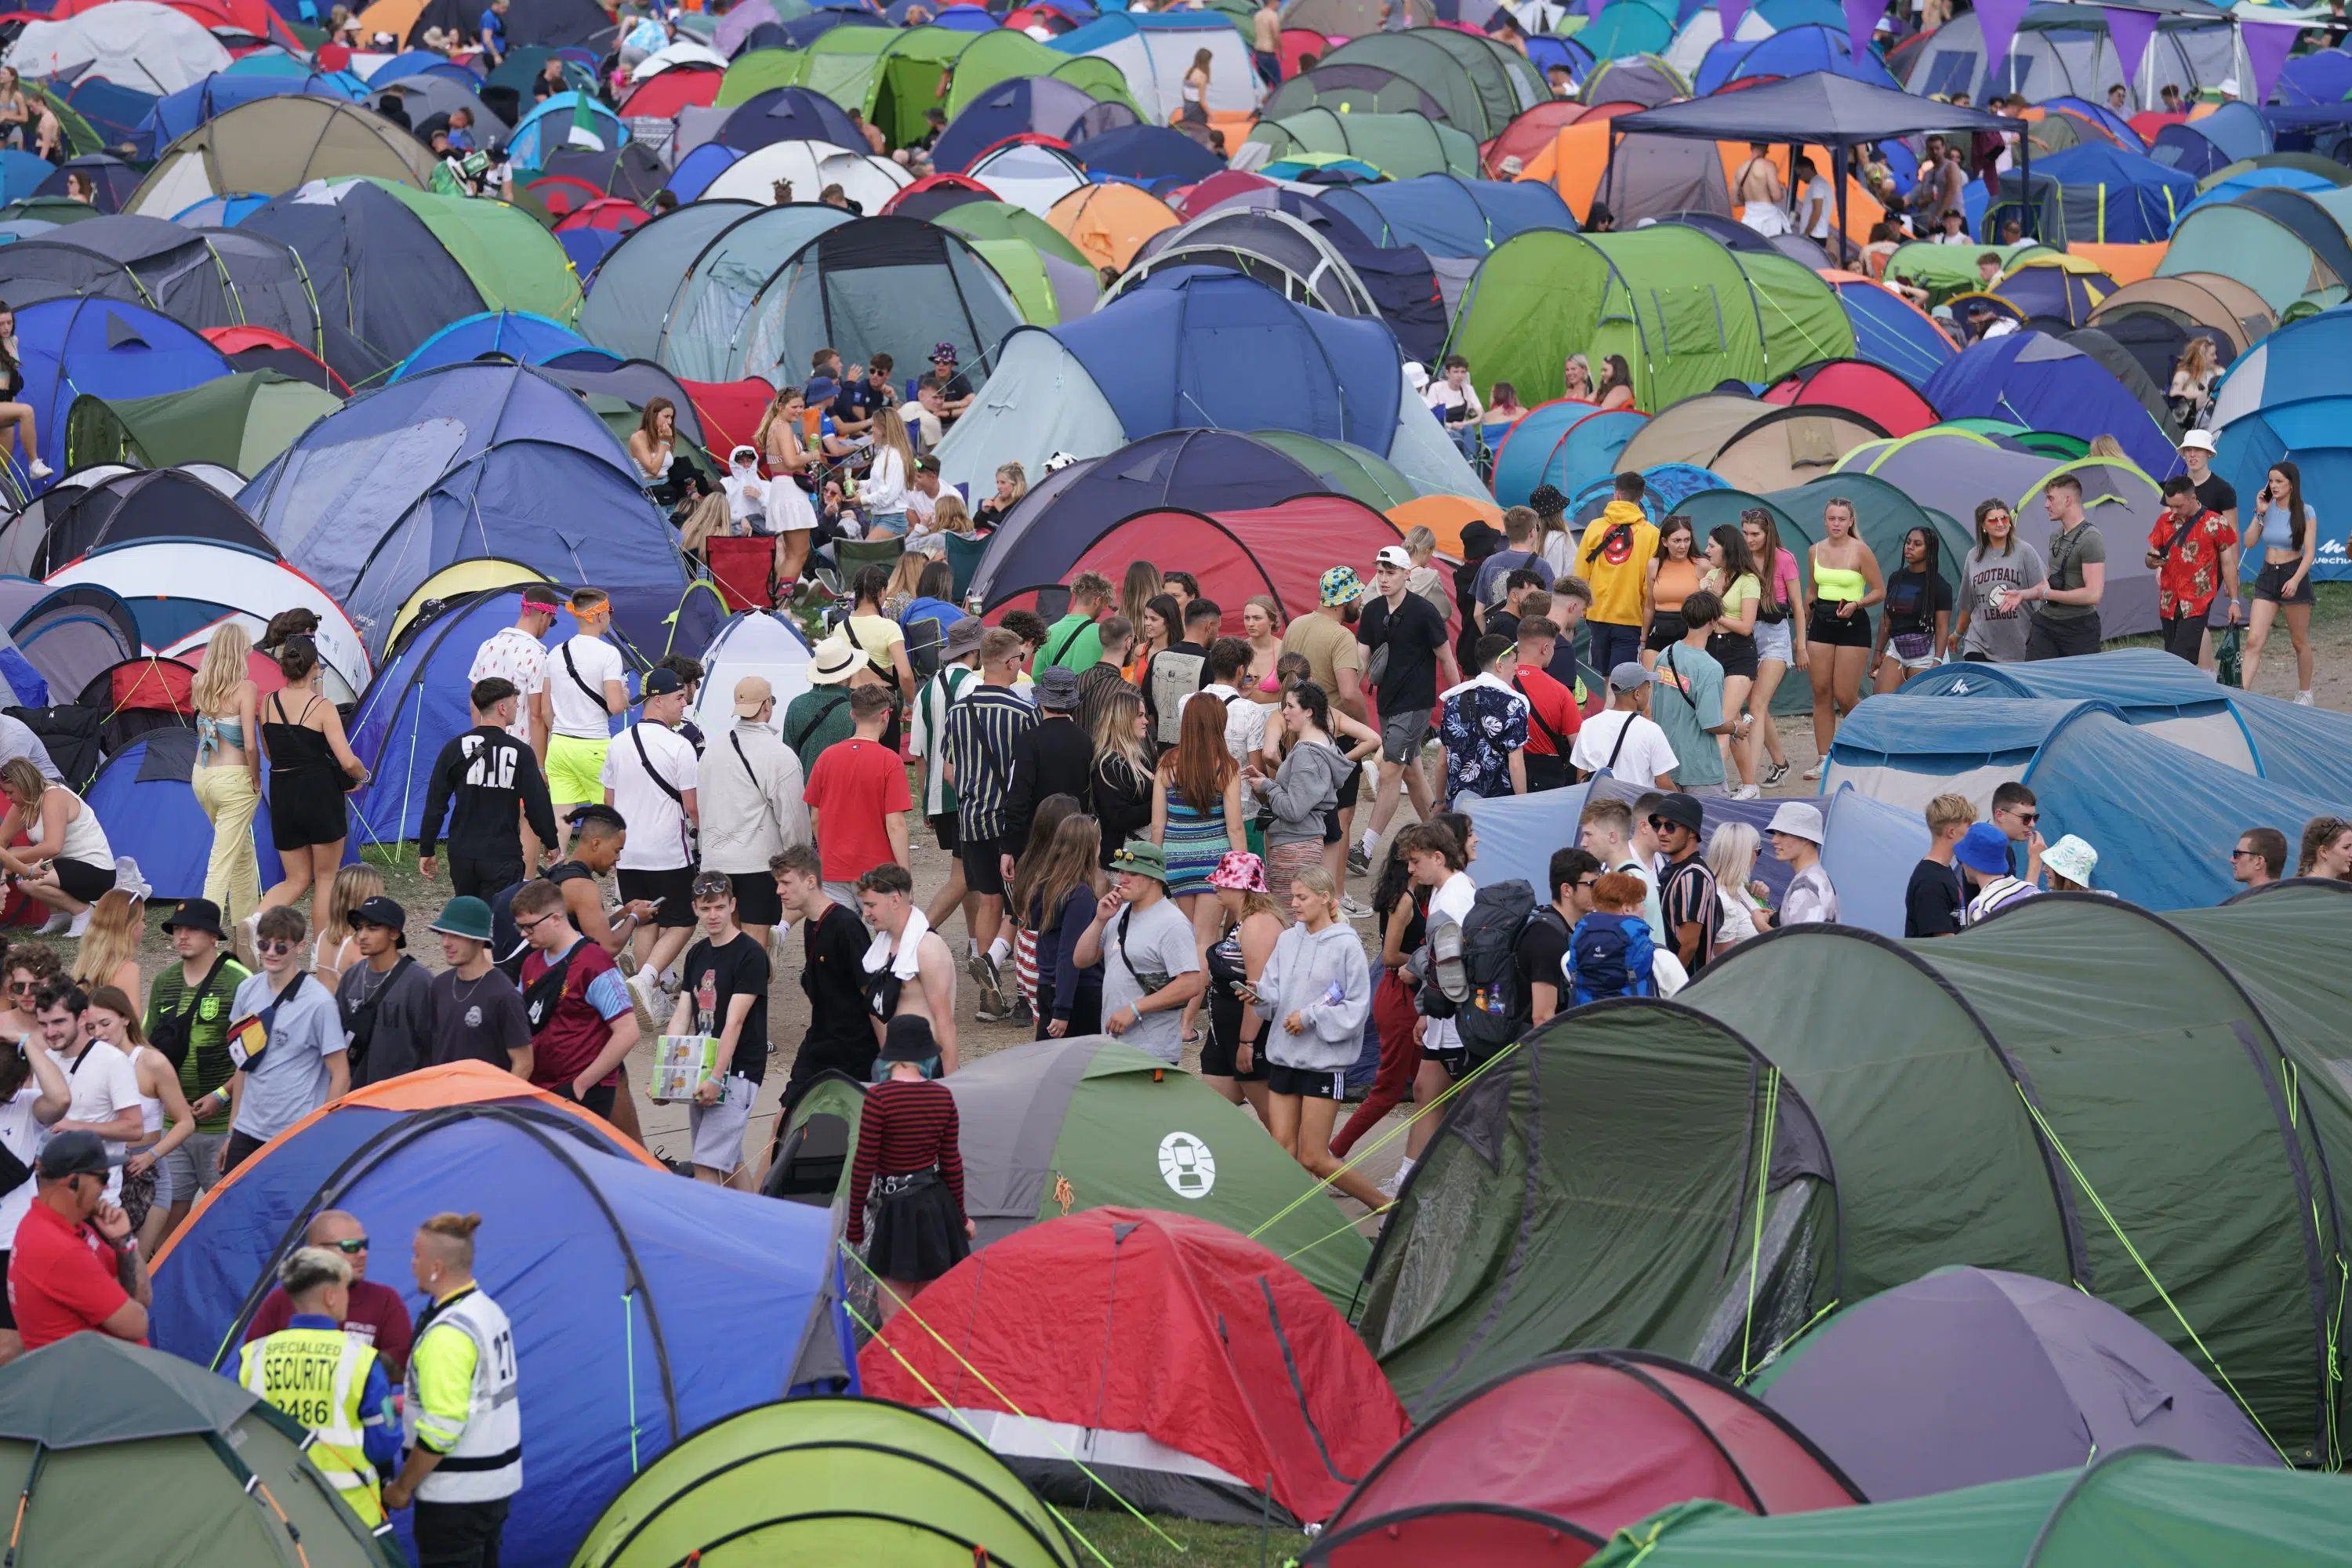 Tents at festival scaled